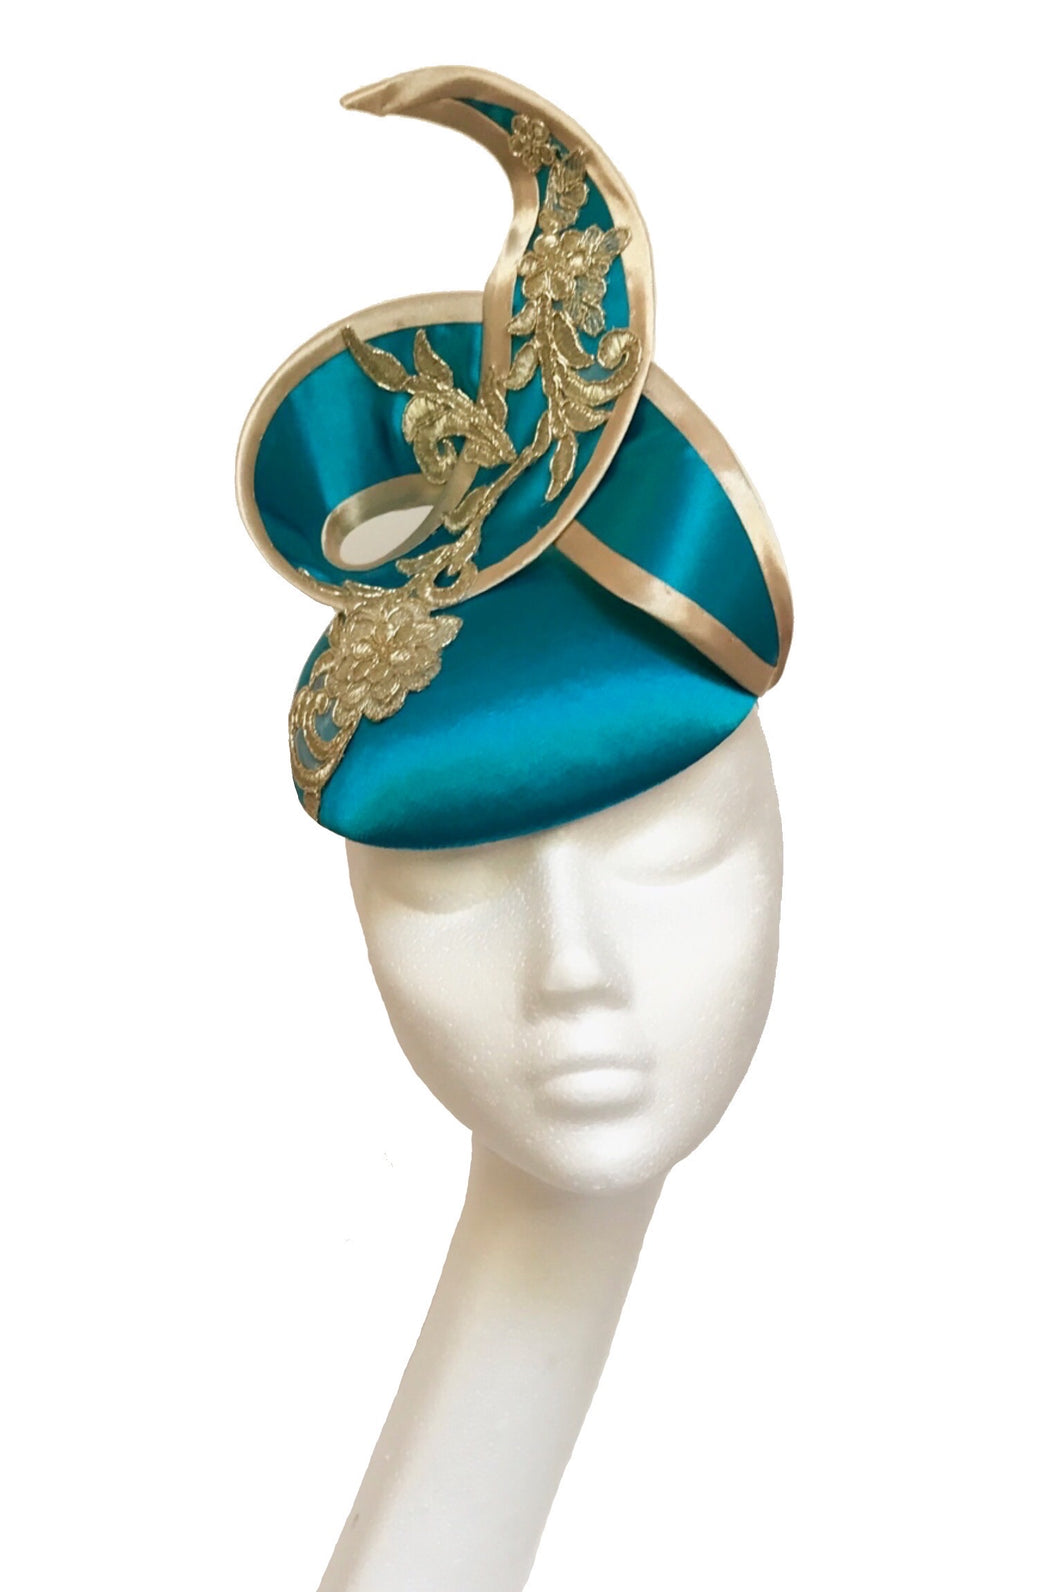 Turquoise and gold wedding hat to hire